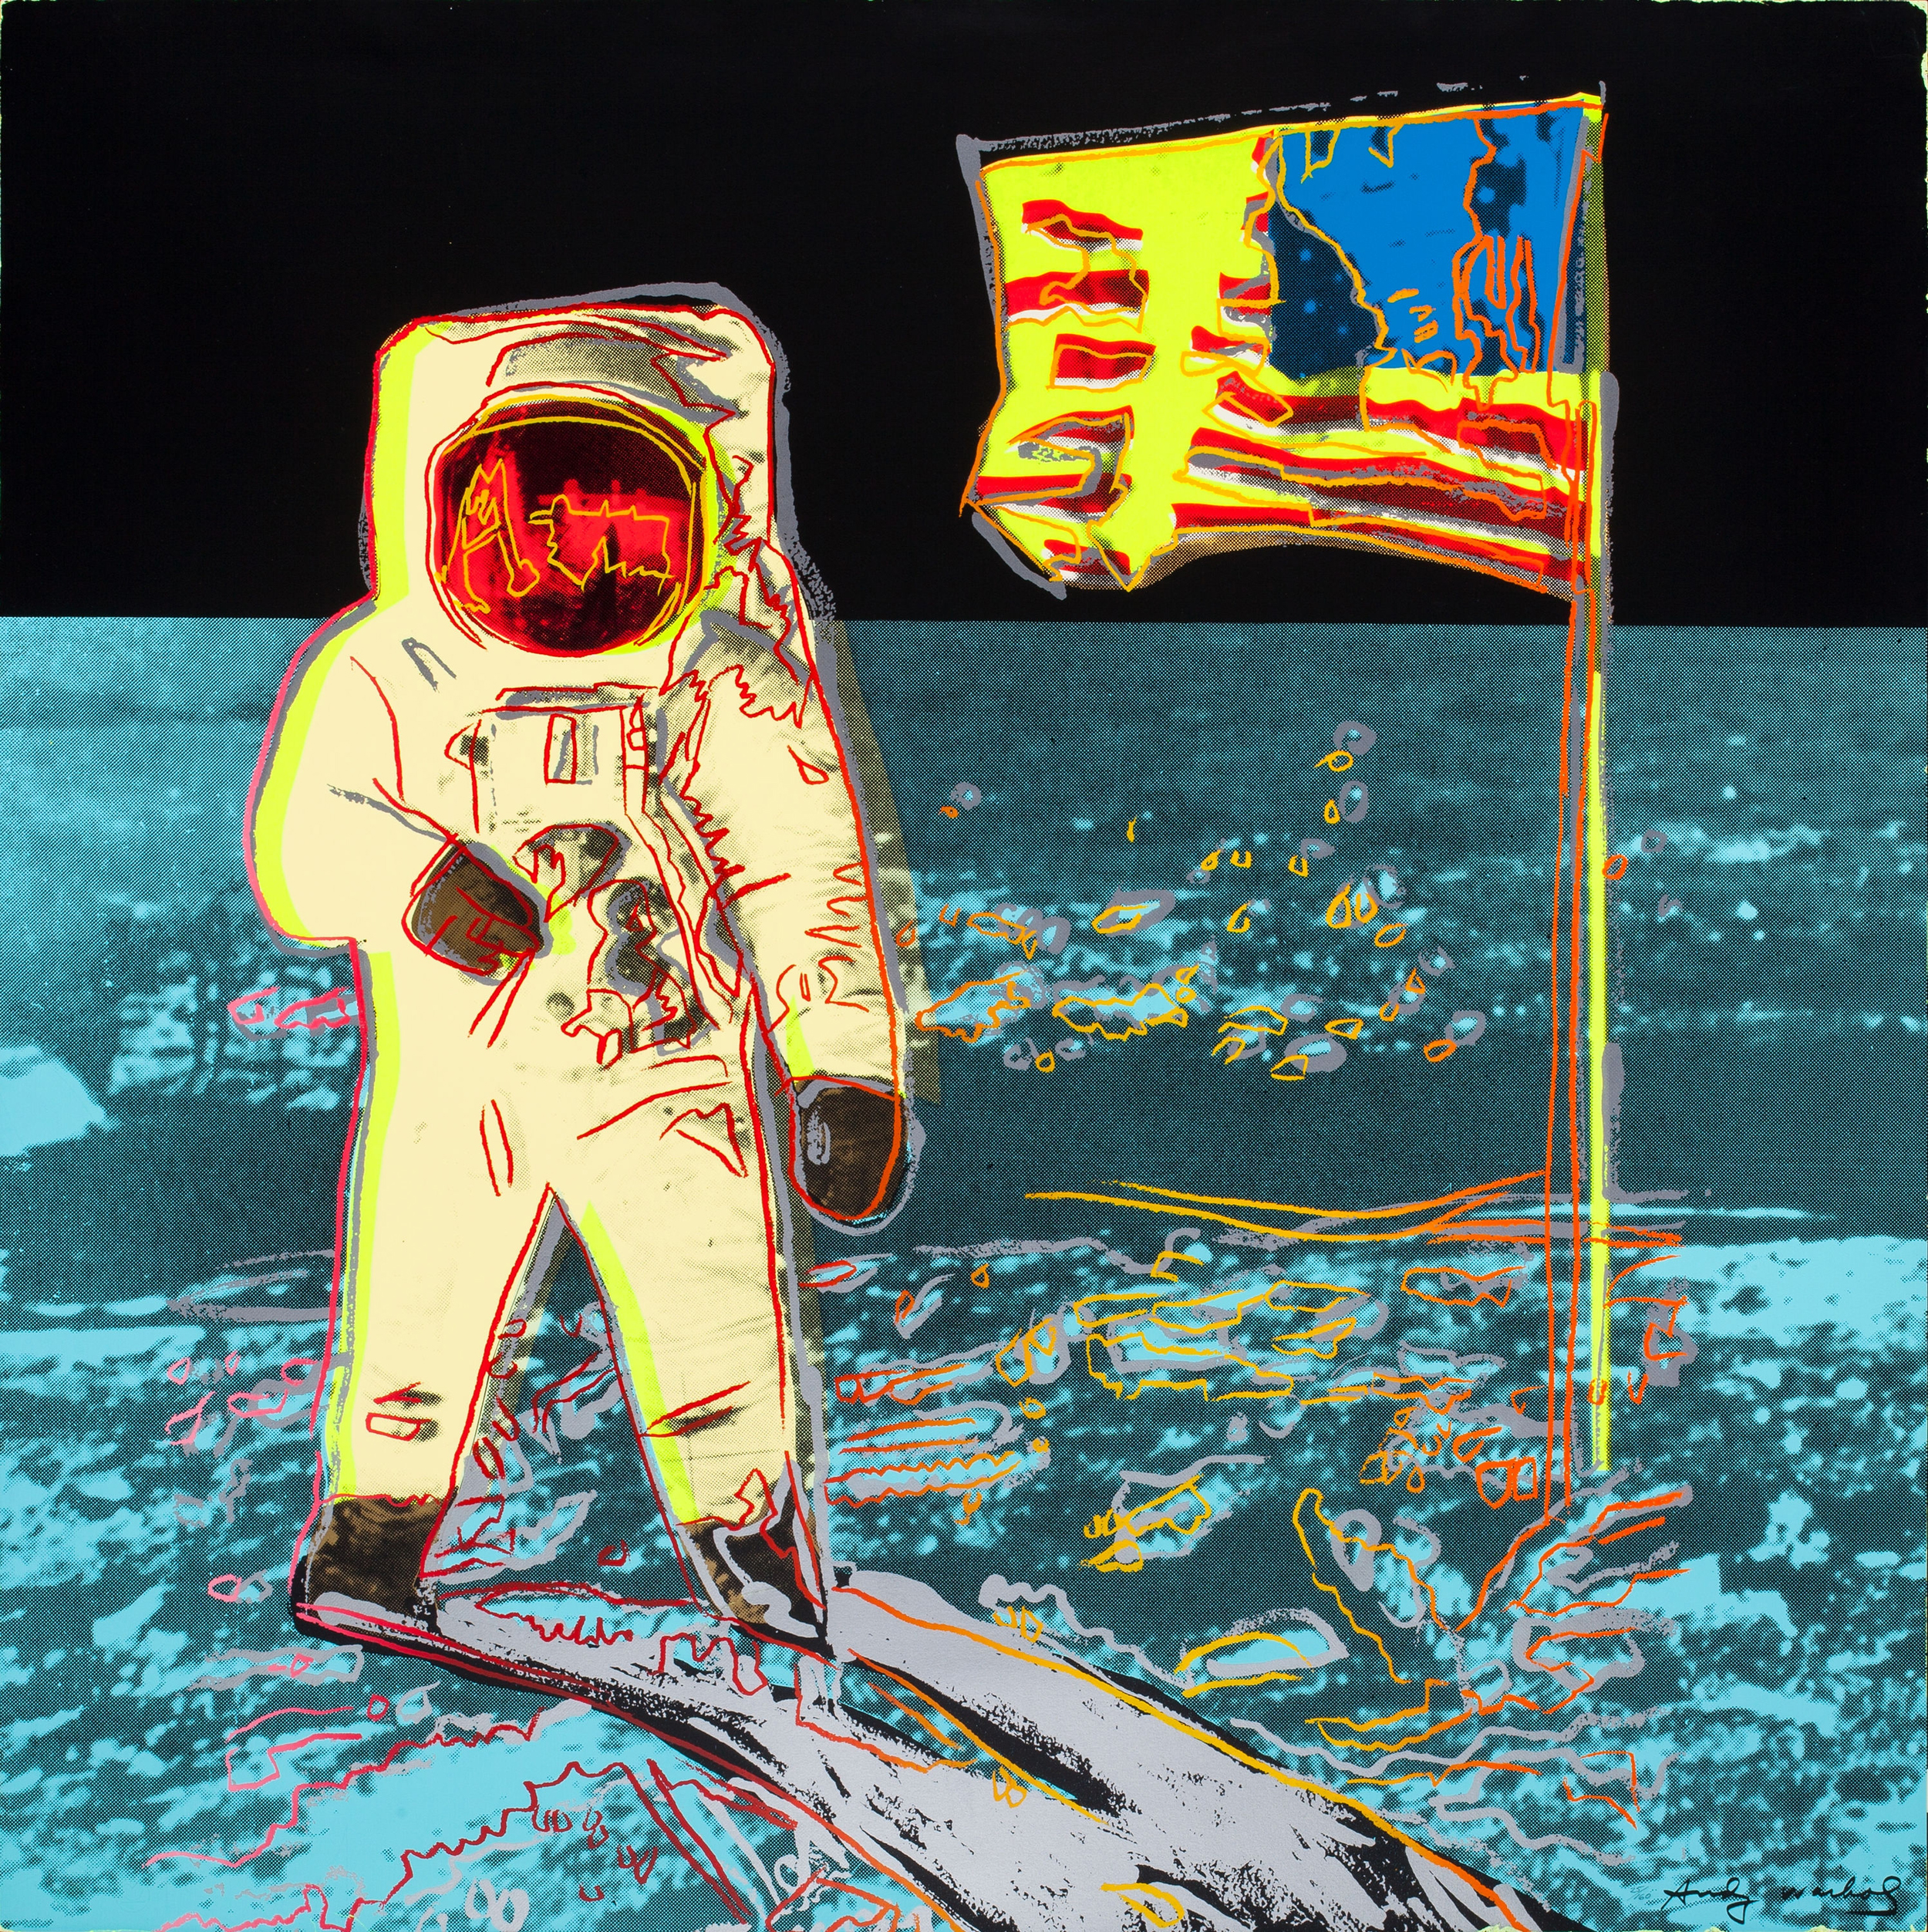 Warhol ‘Moonwalk’ from Buzz Aldrin lands at Heritage sale May 30 